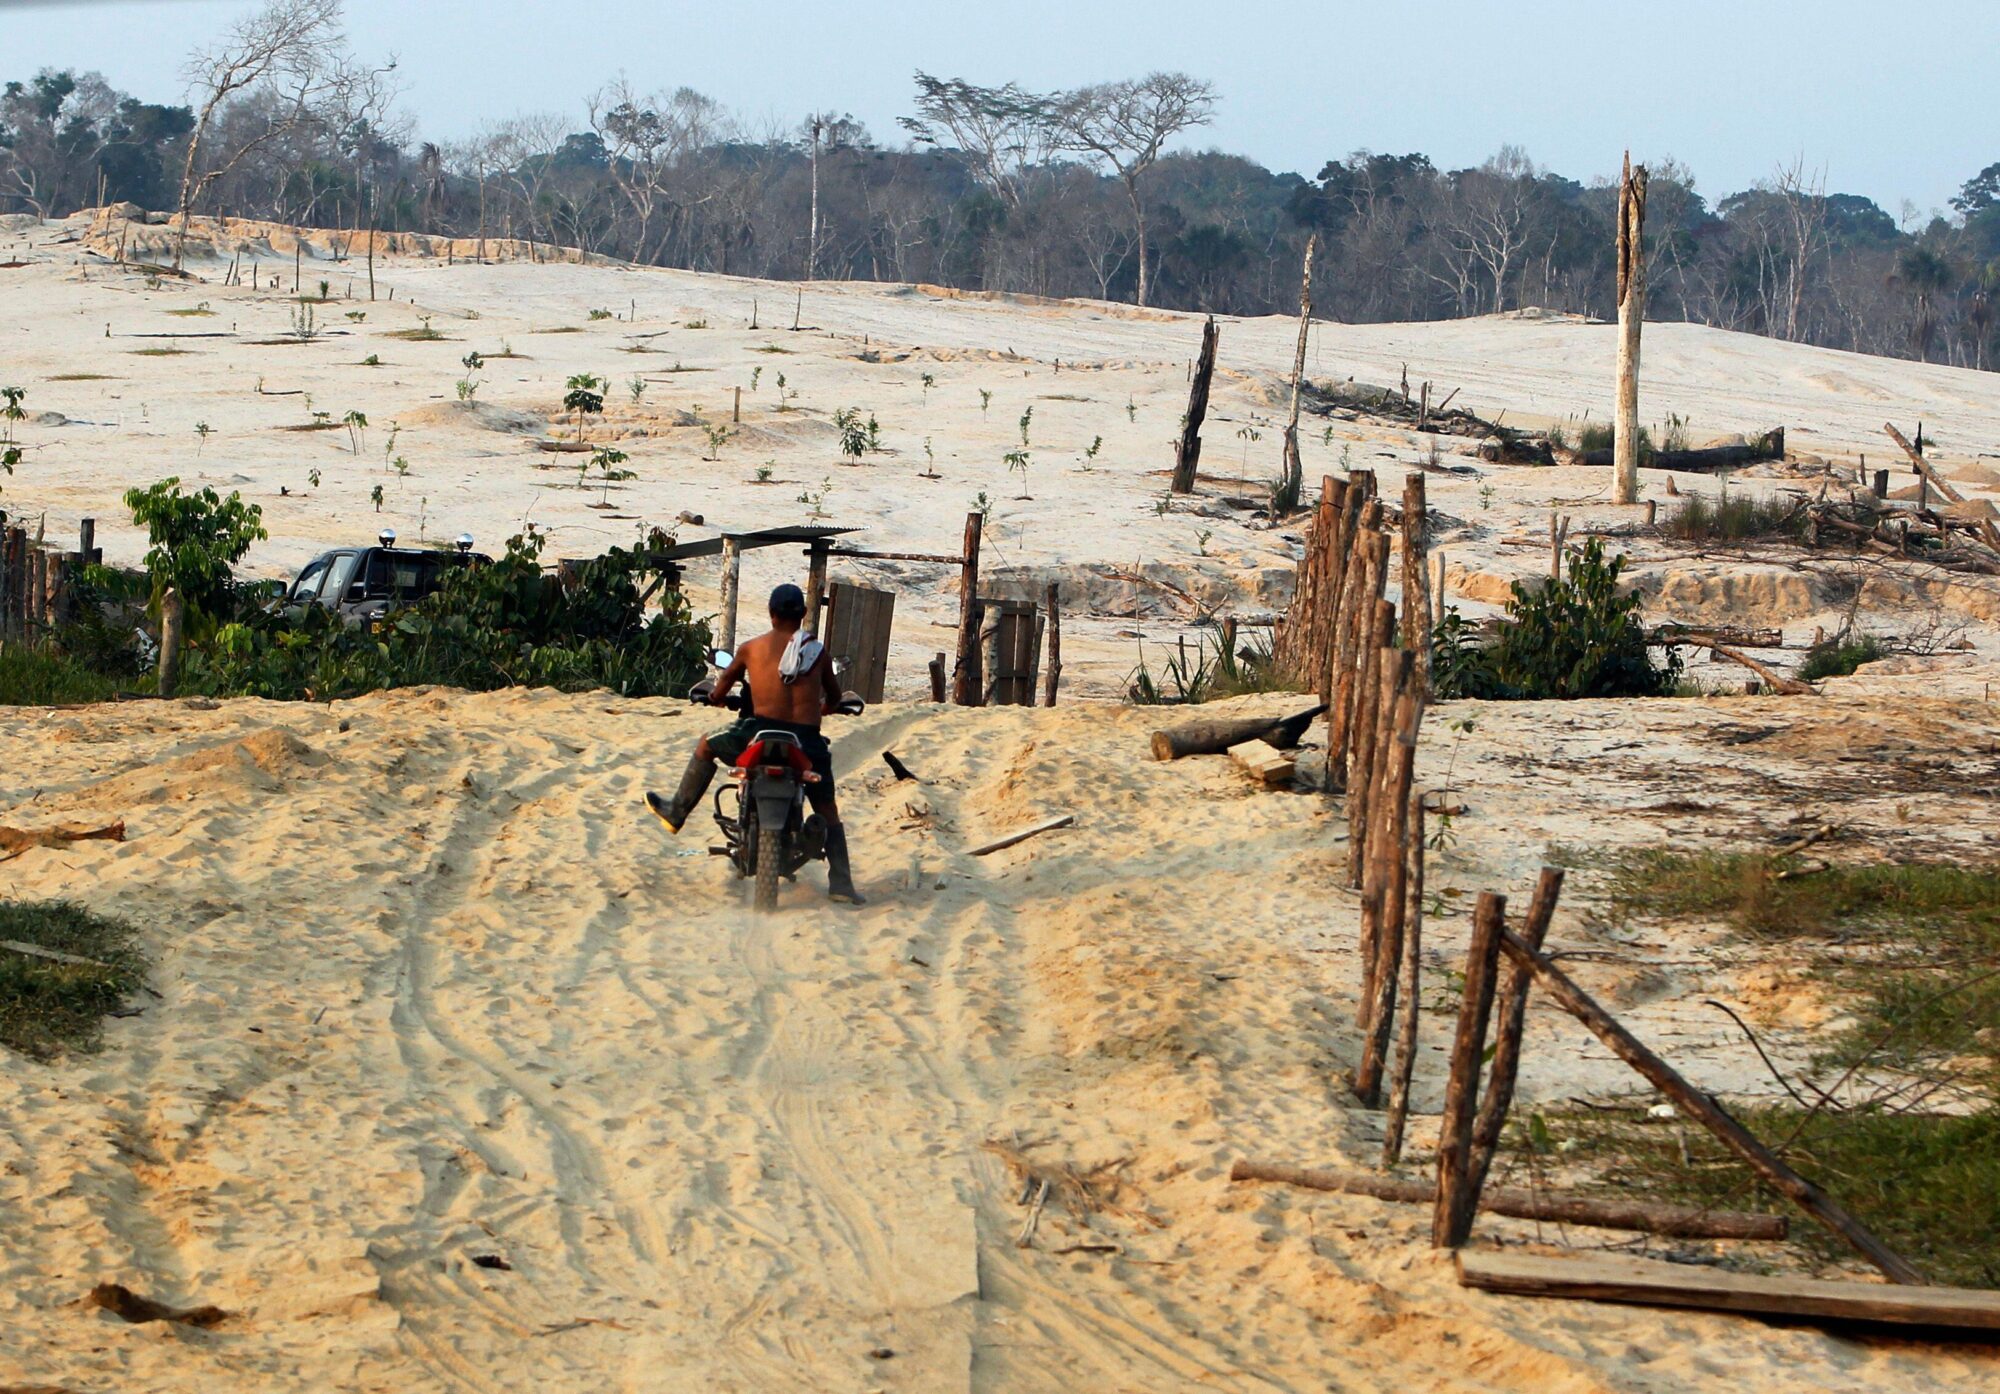 Motorcyclist in deforested area